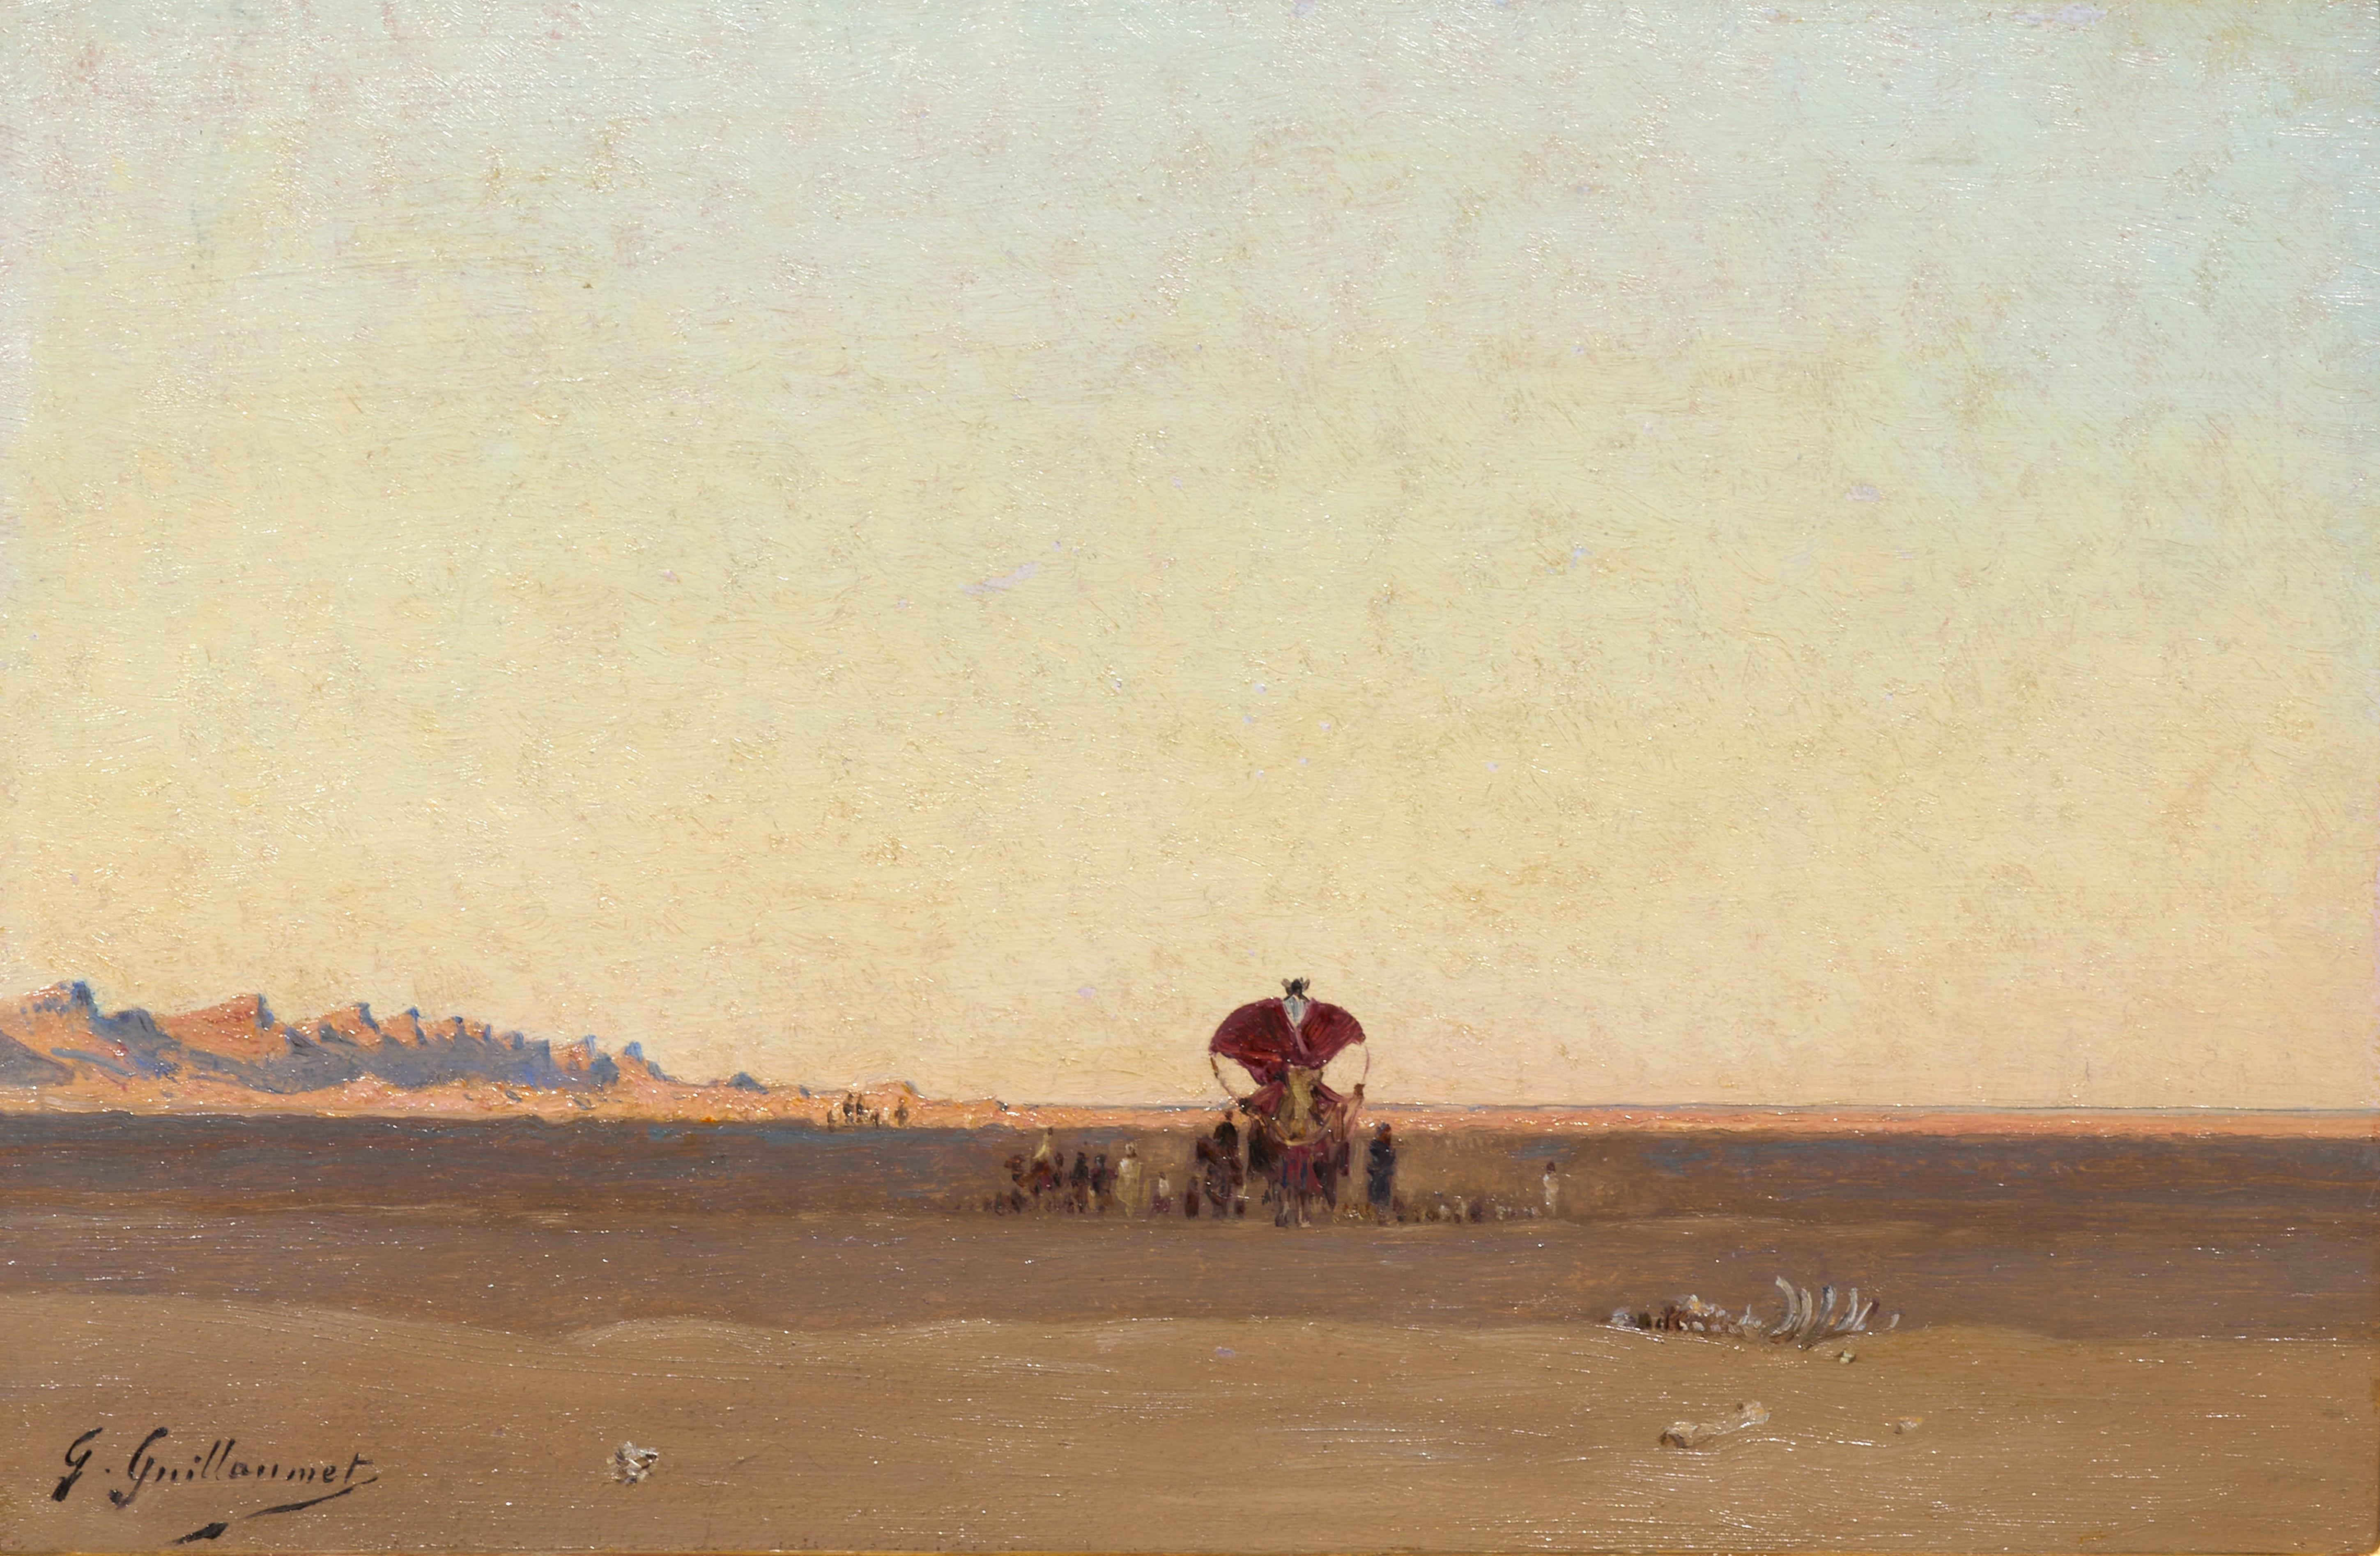 Caravan in the Desert, a painting by Gustave Guillaumet (1840 - 1887) 1